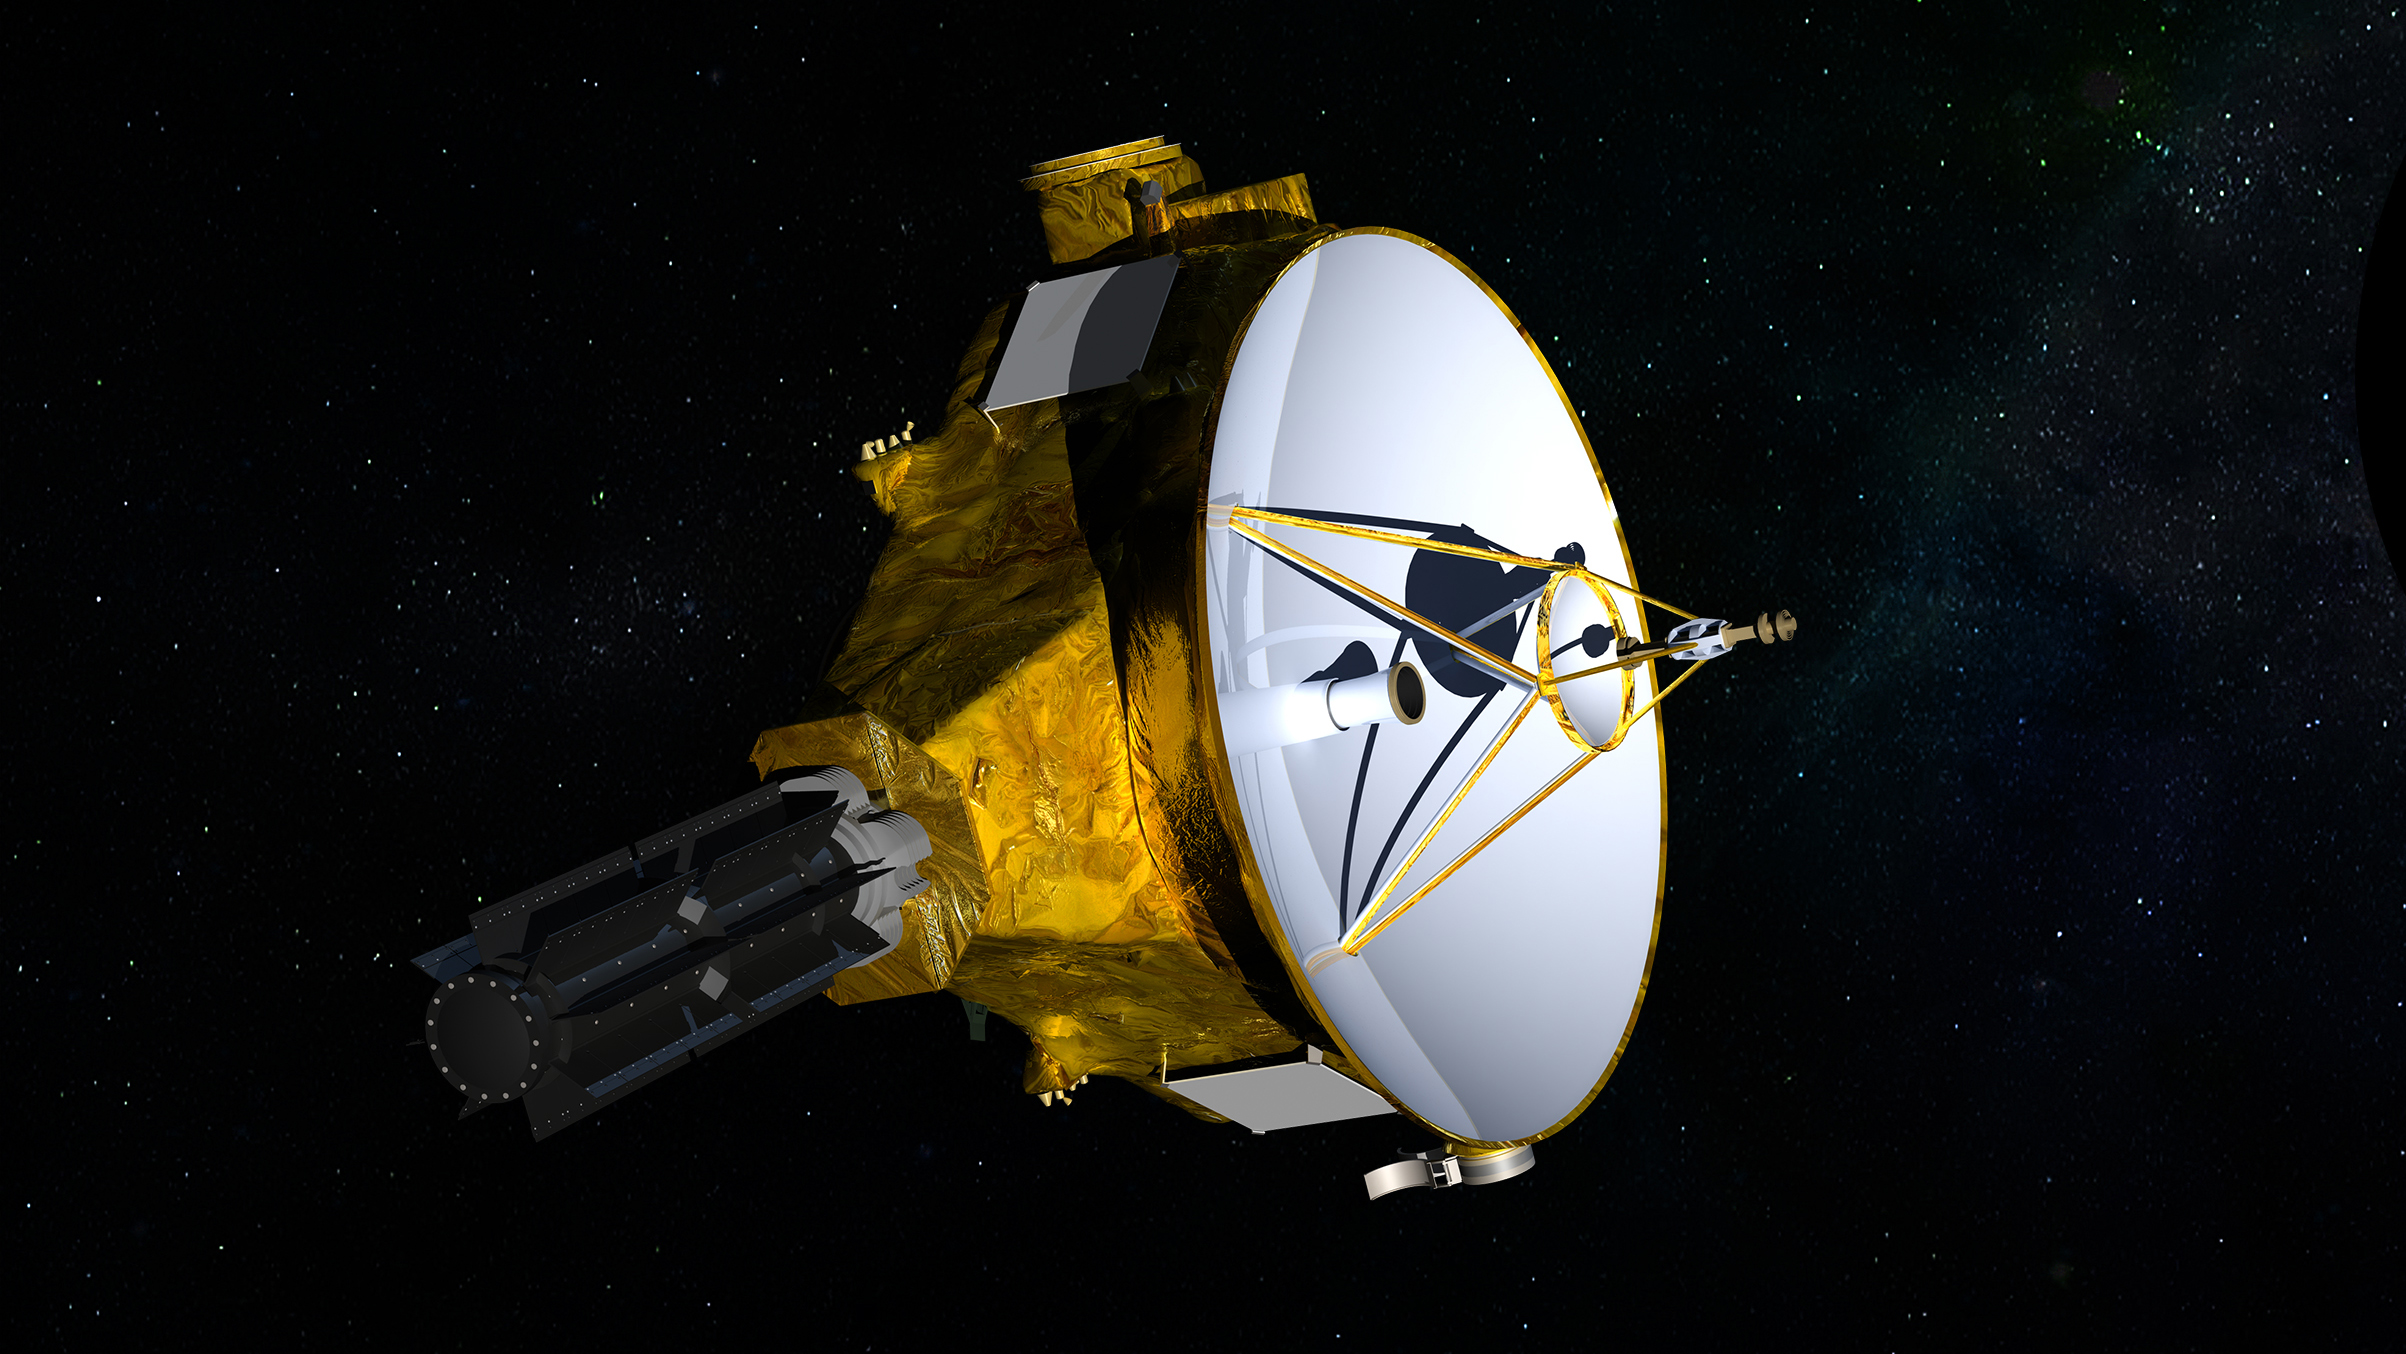 New Horizons in space